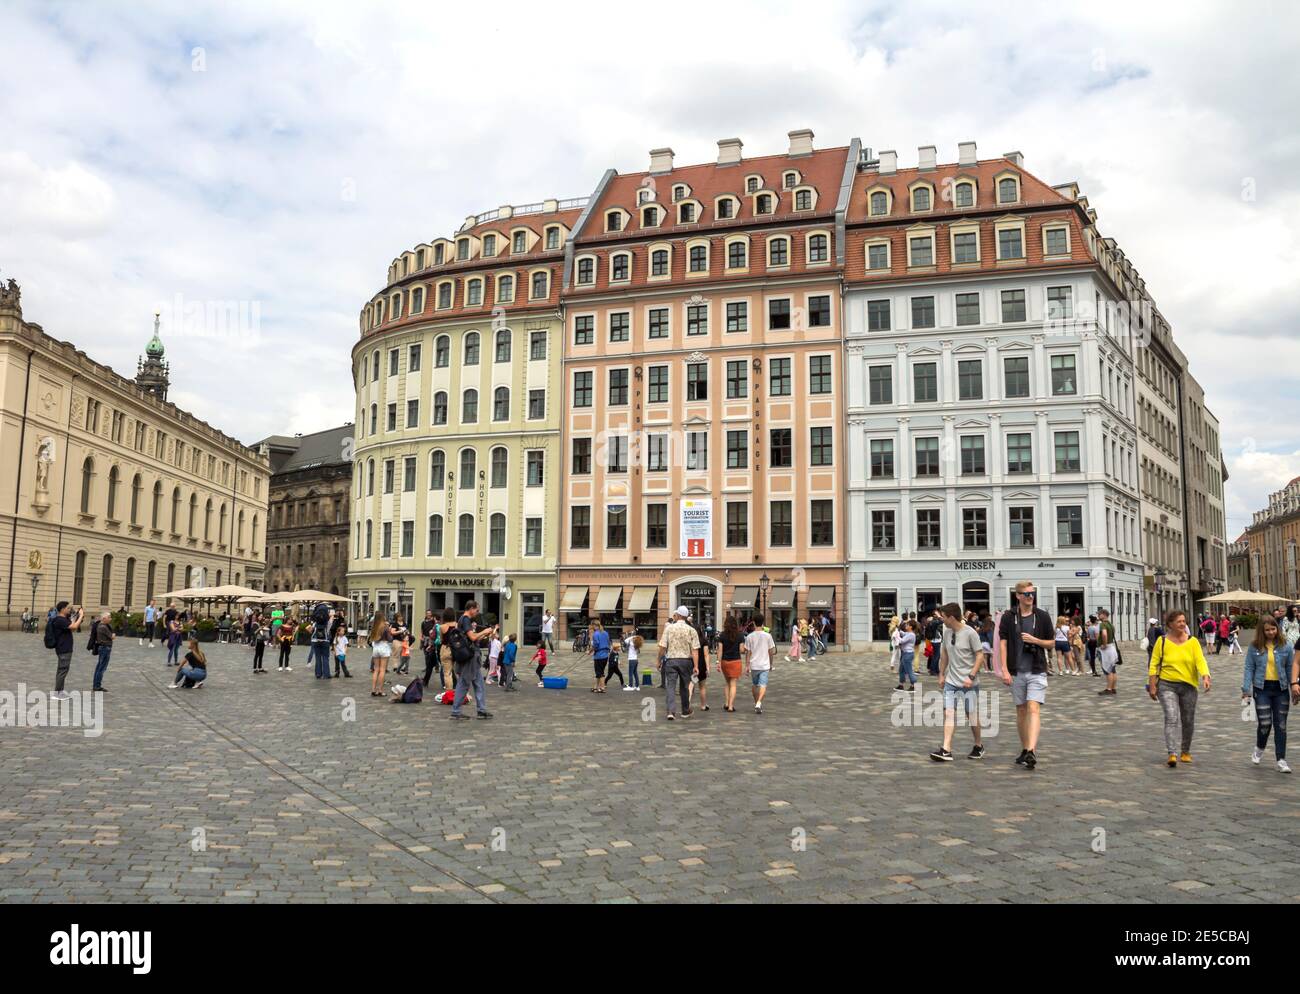 Tourist walk on the Dresden Frauenkirche square in Dresden. Built in the 18th century, was destroyed in the firebombing of Dresden during World War II Stock Photo